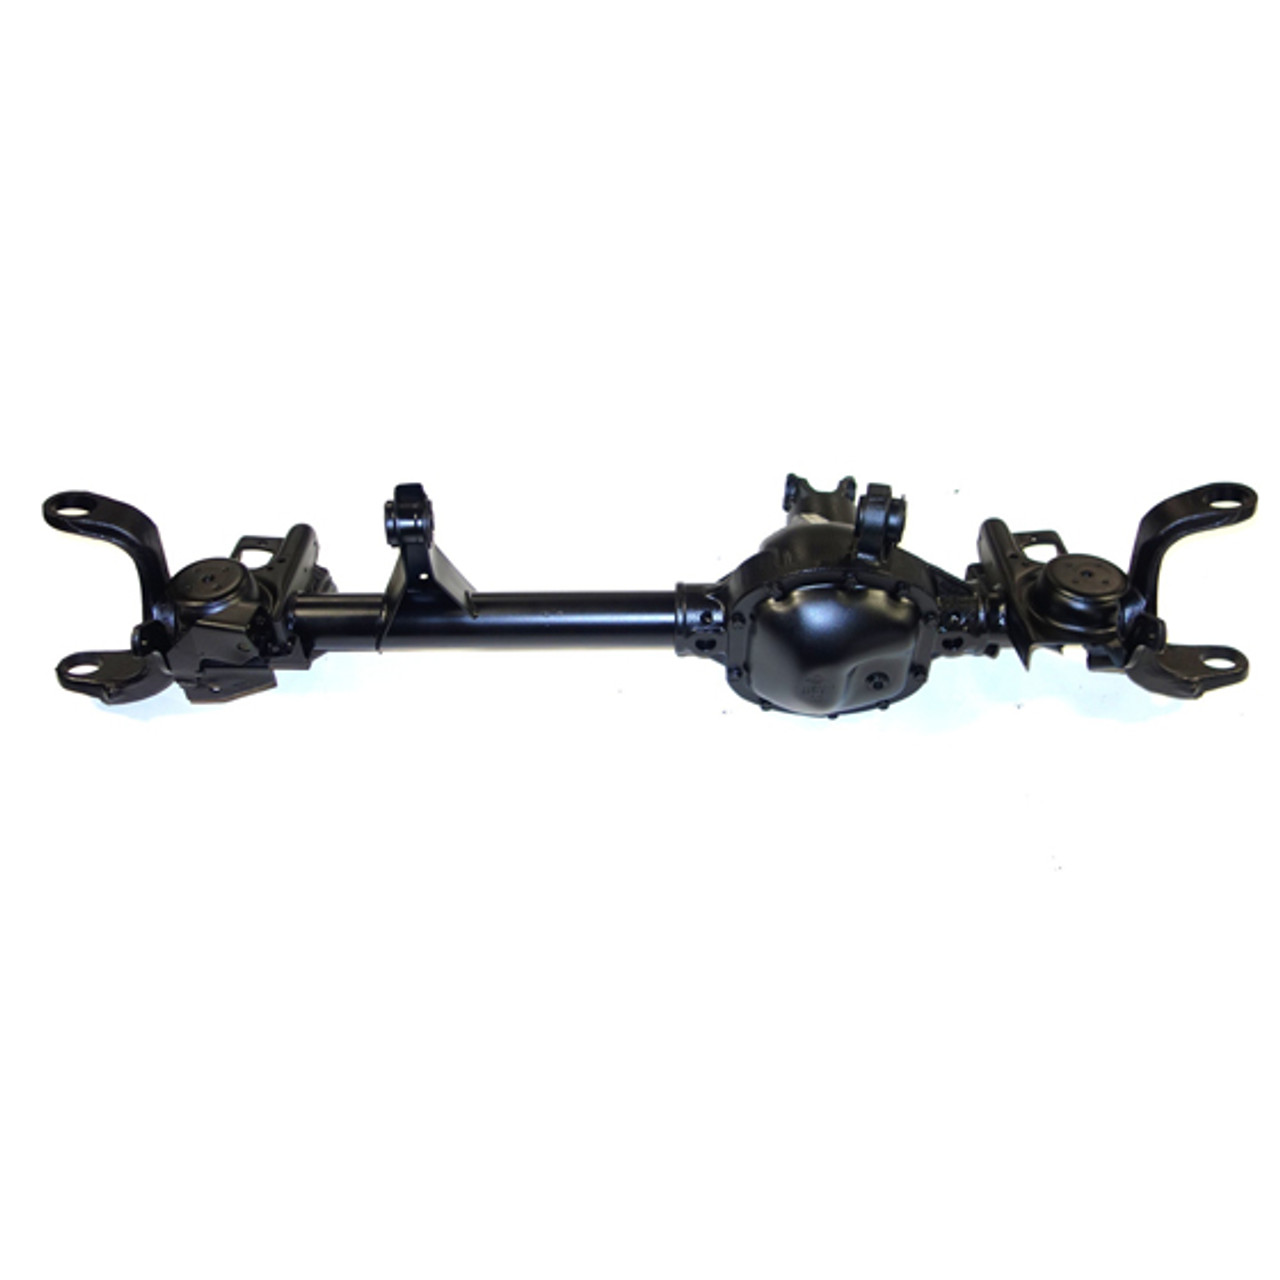 Reman Complete Axle Assembly for Dana 30 94-99 Jeep Cherokee 4.11 Ratio with ABS